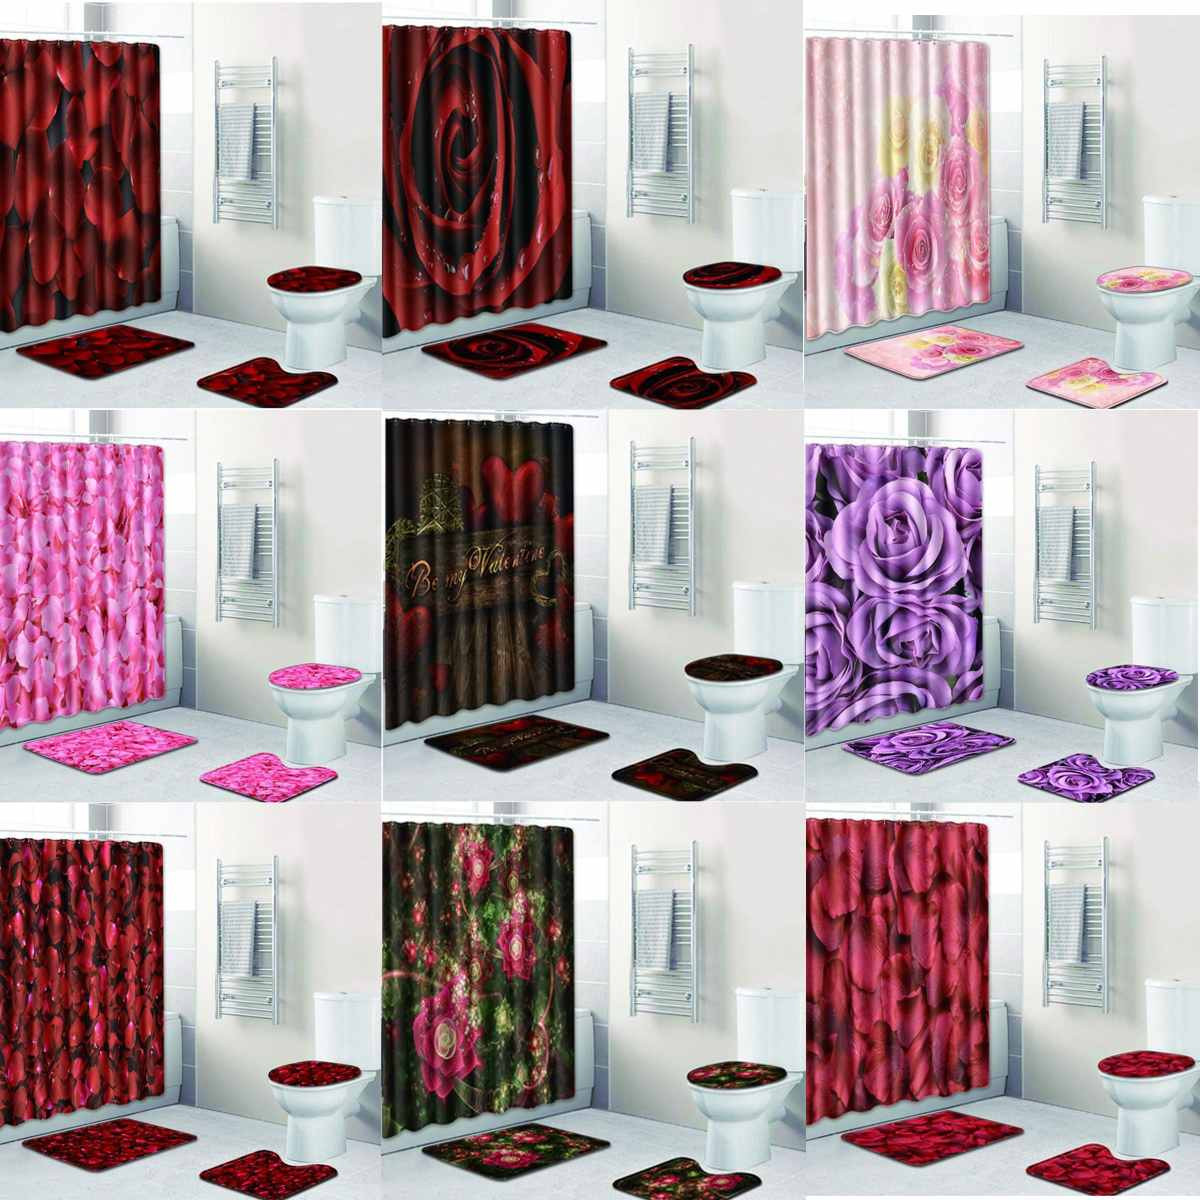 Bathroom Sets With Shower Curtain
 4pcs Flowers Shower Curtains Waterproof Fabric Bathroom